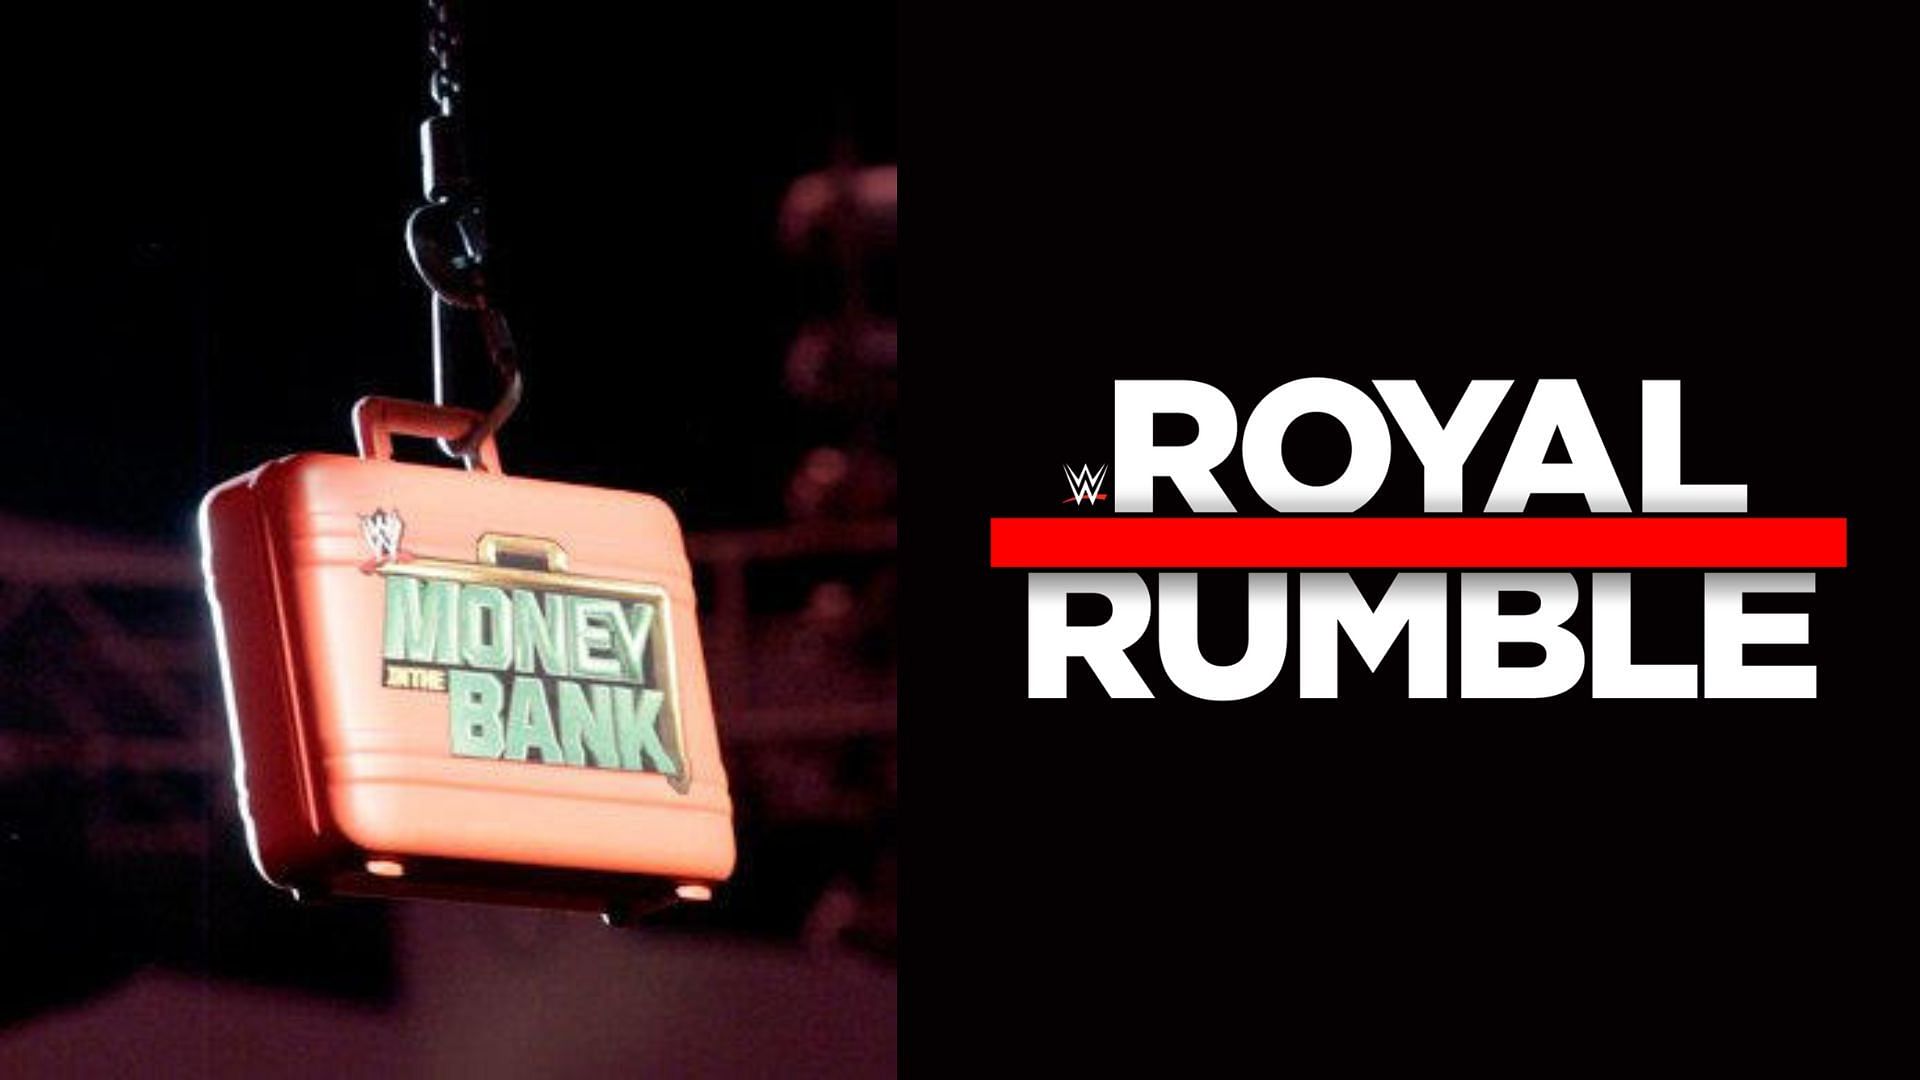 The Royal Rumble takes place every January